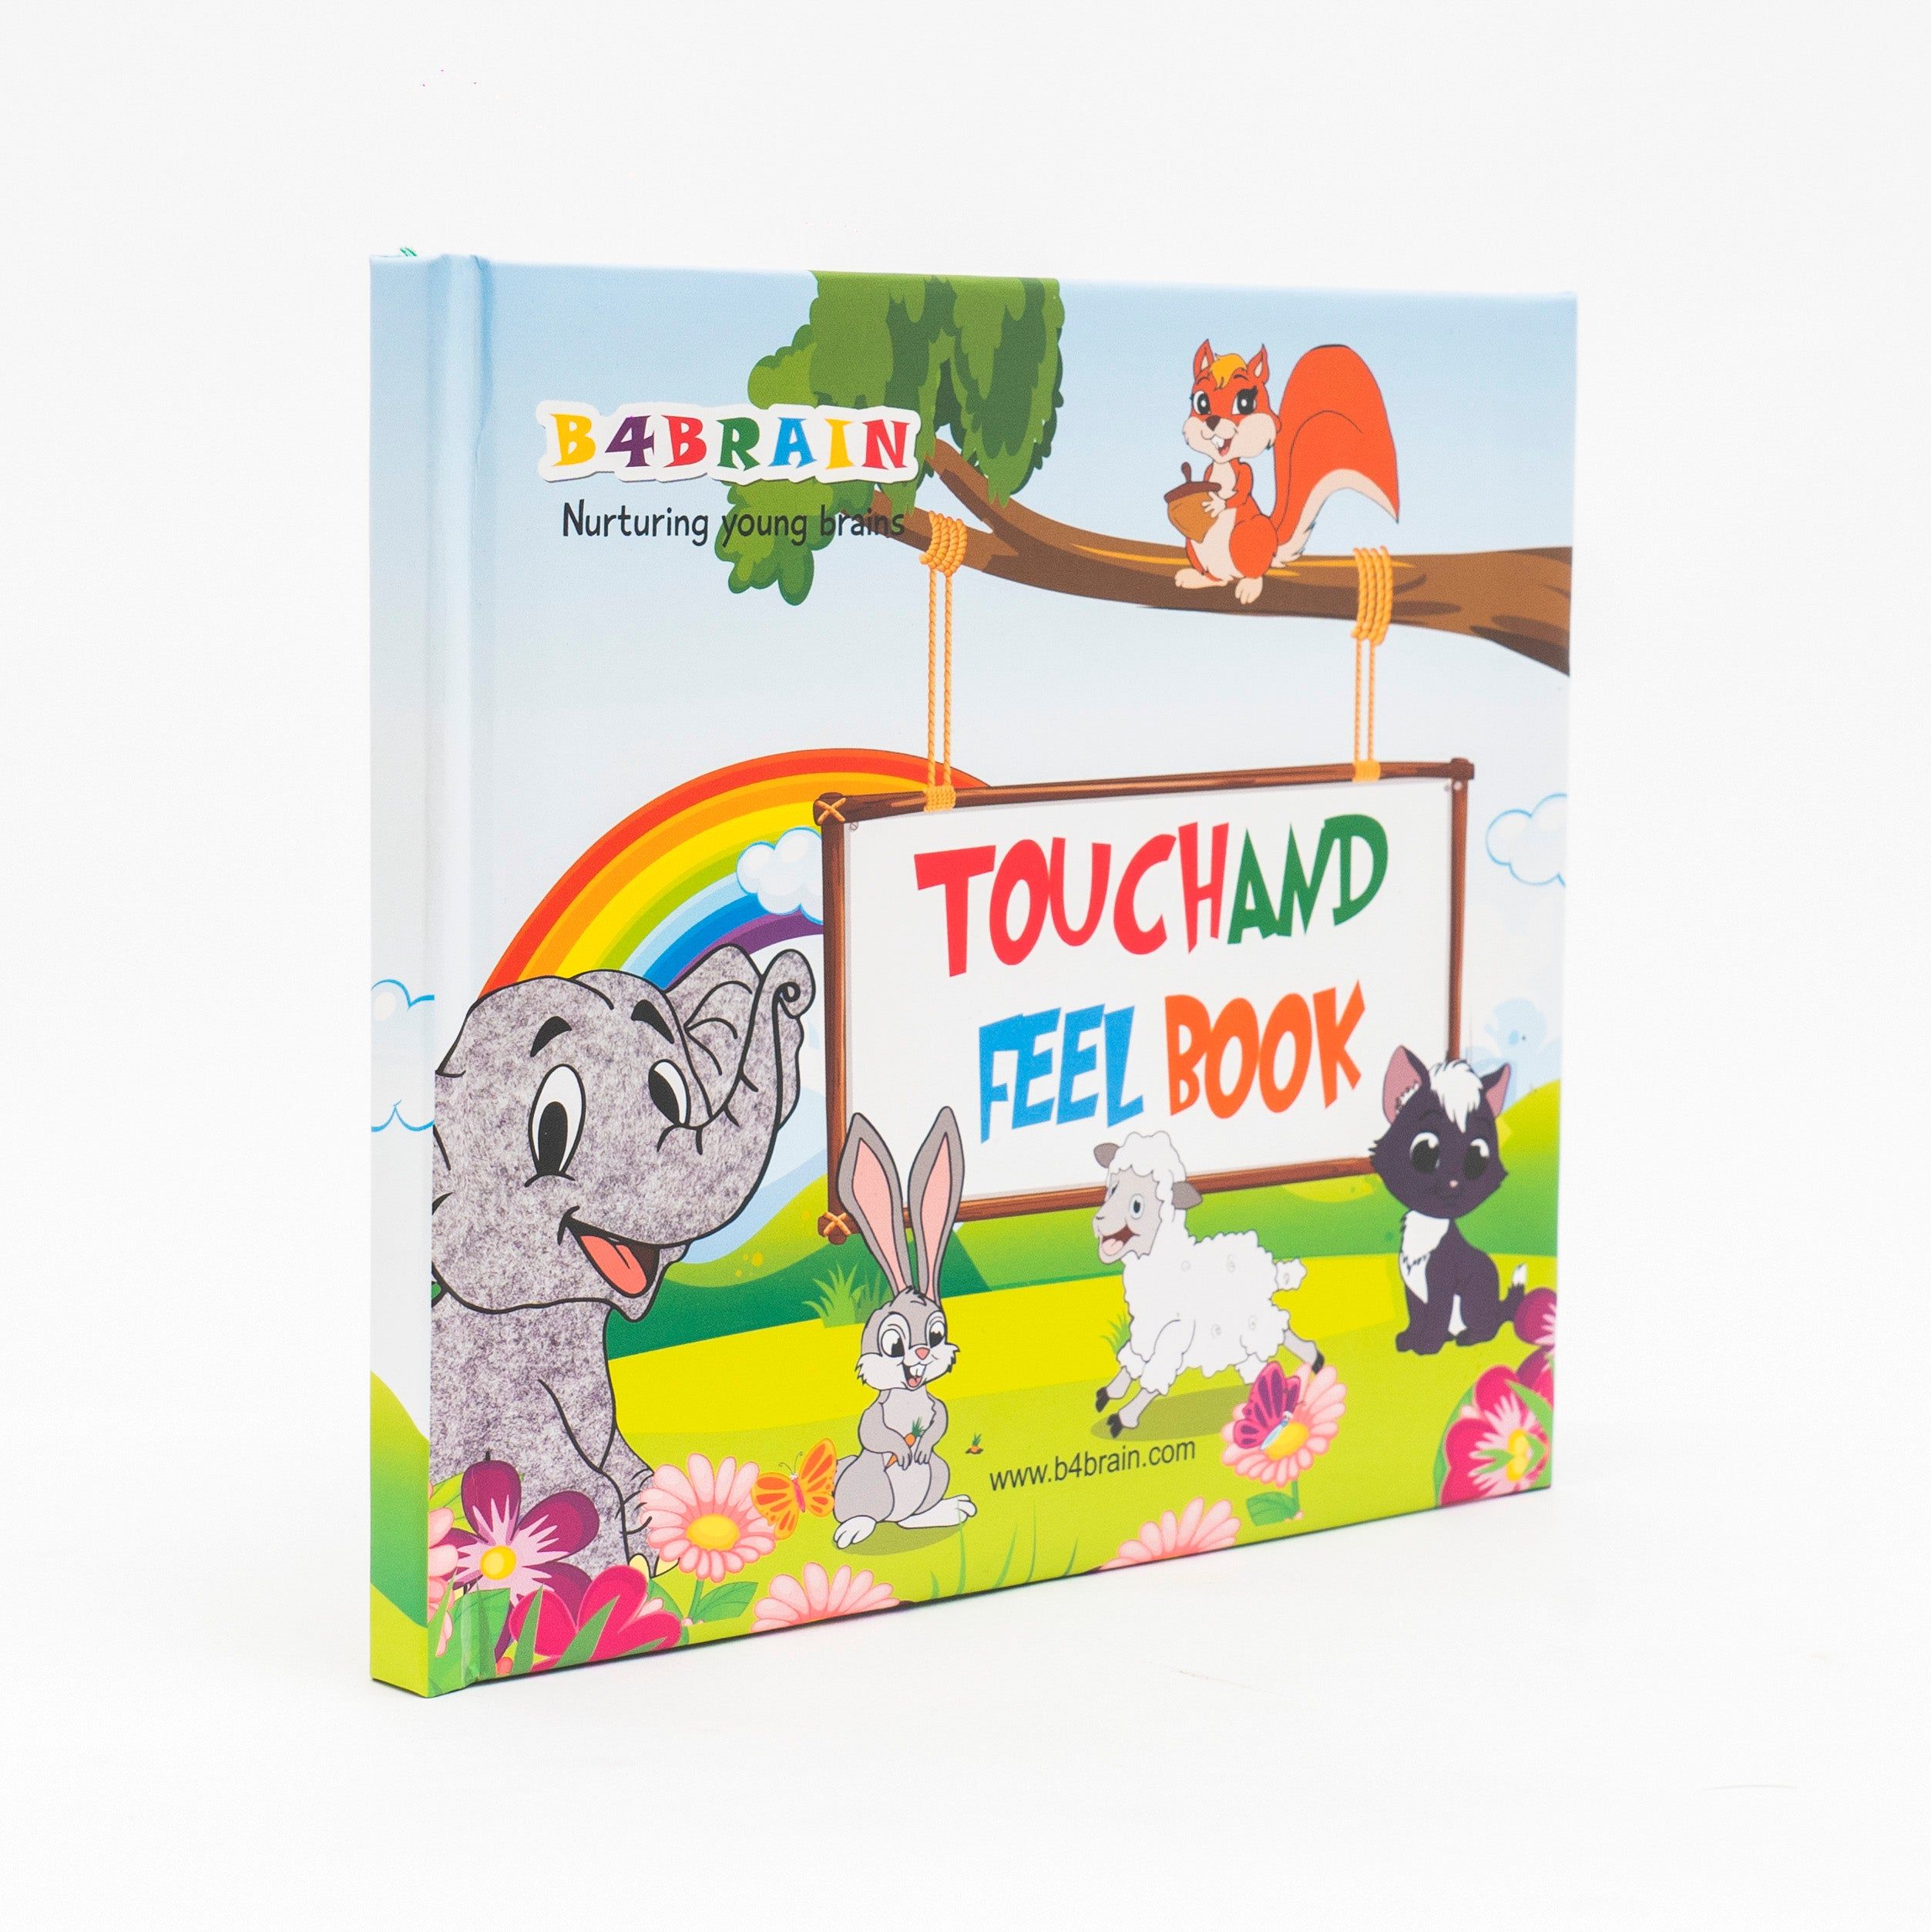 Touch and feel book For babies 7-9 month - B4brain